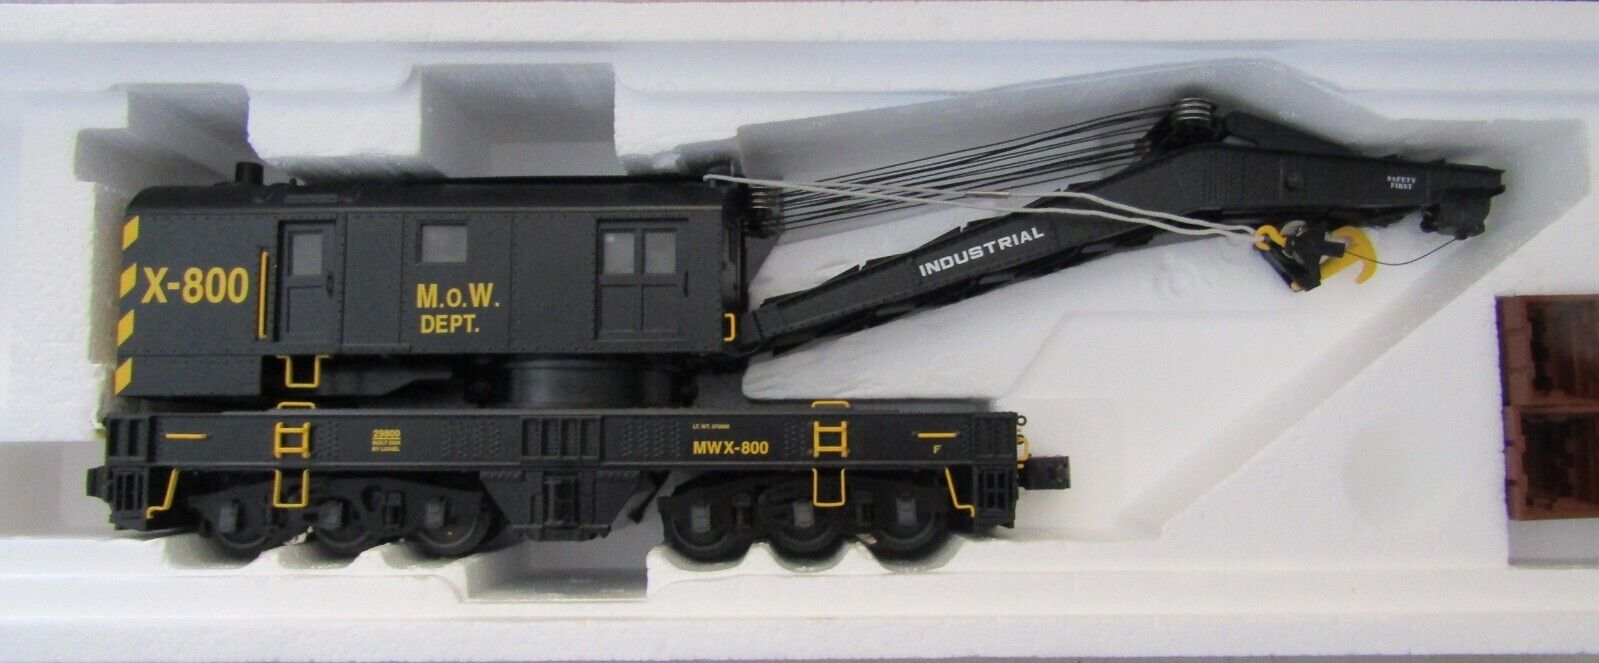 LIONEL MAINTENANCE OF WAY CRANE CAR WITH TMCC 6-29800 MINT IN BOX